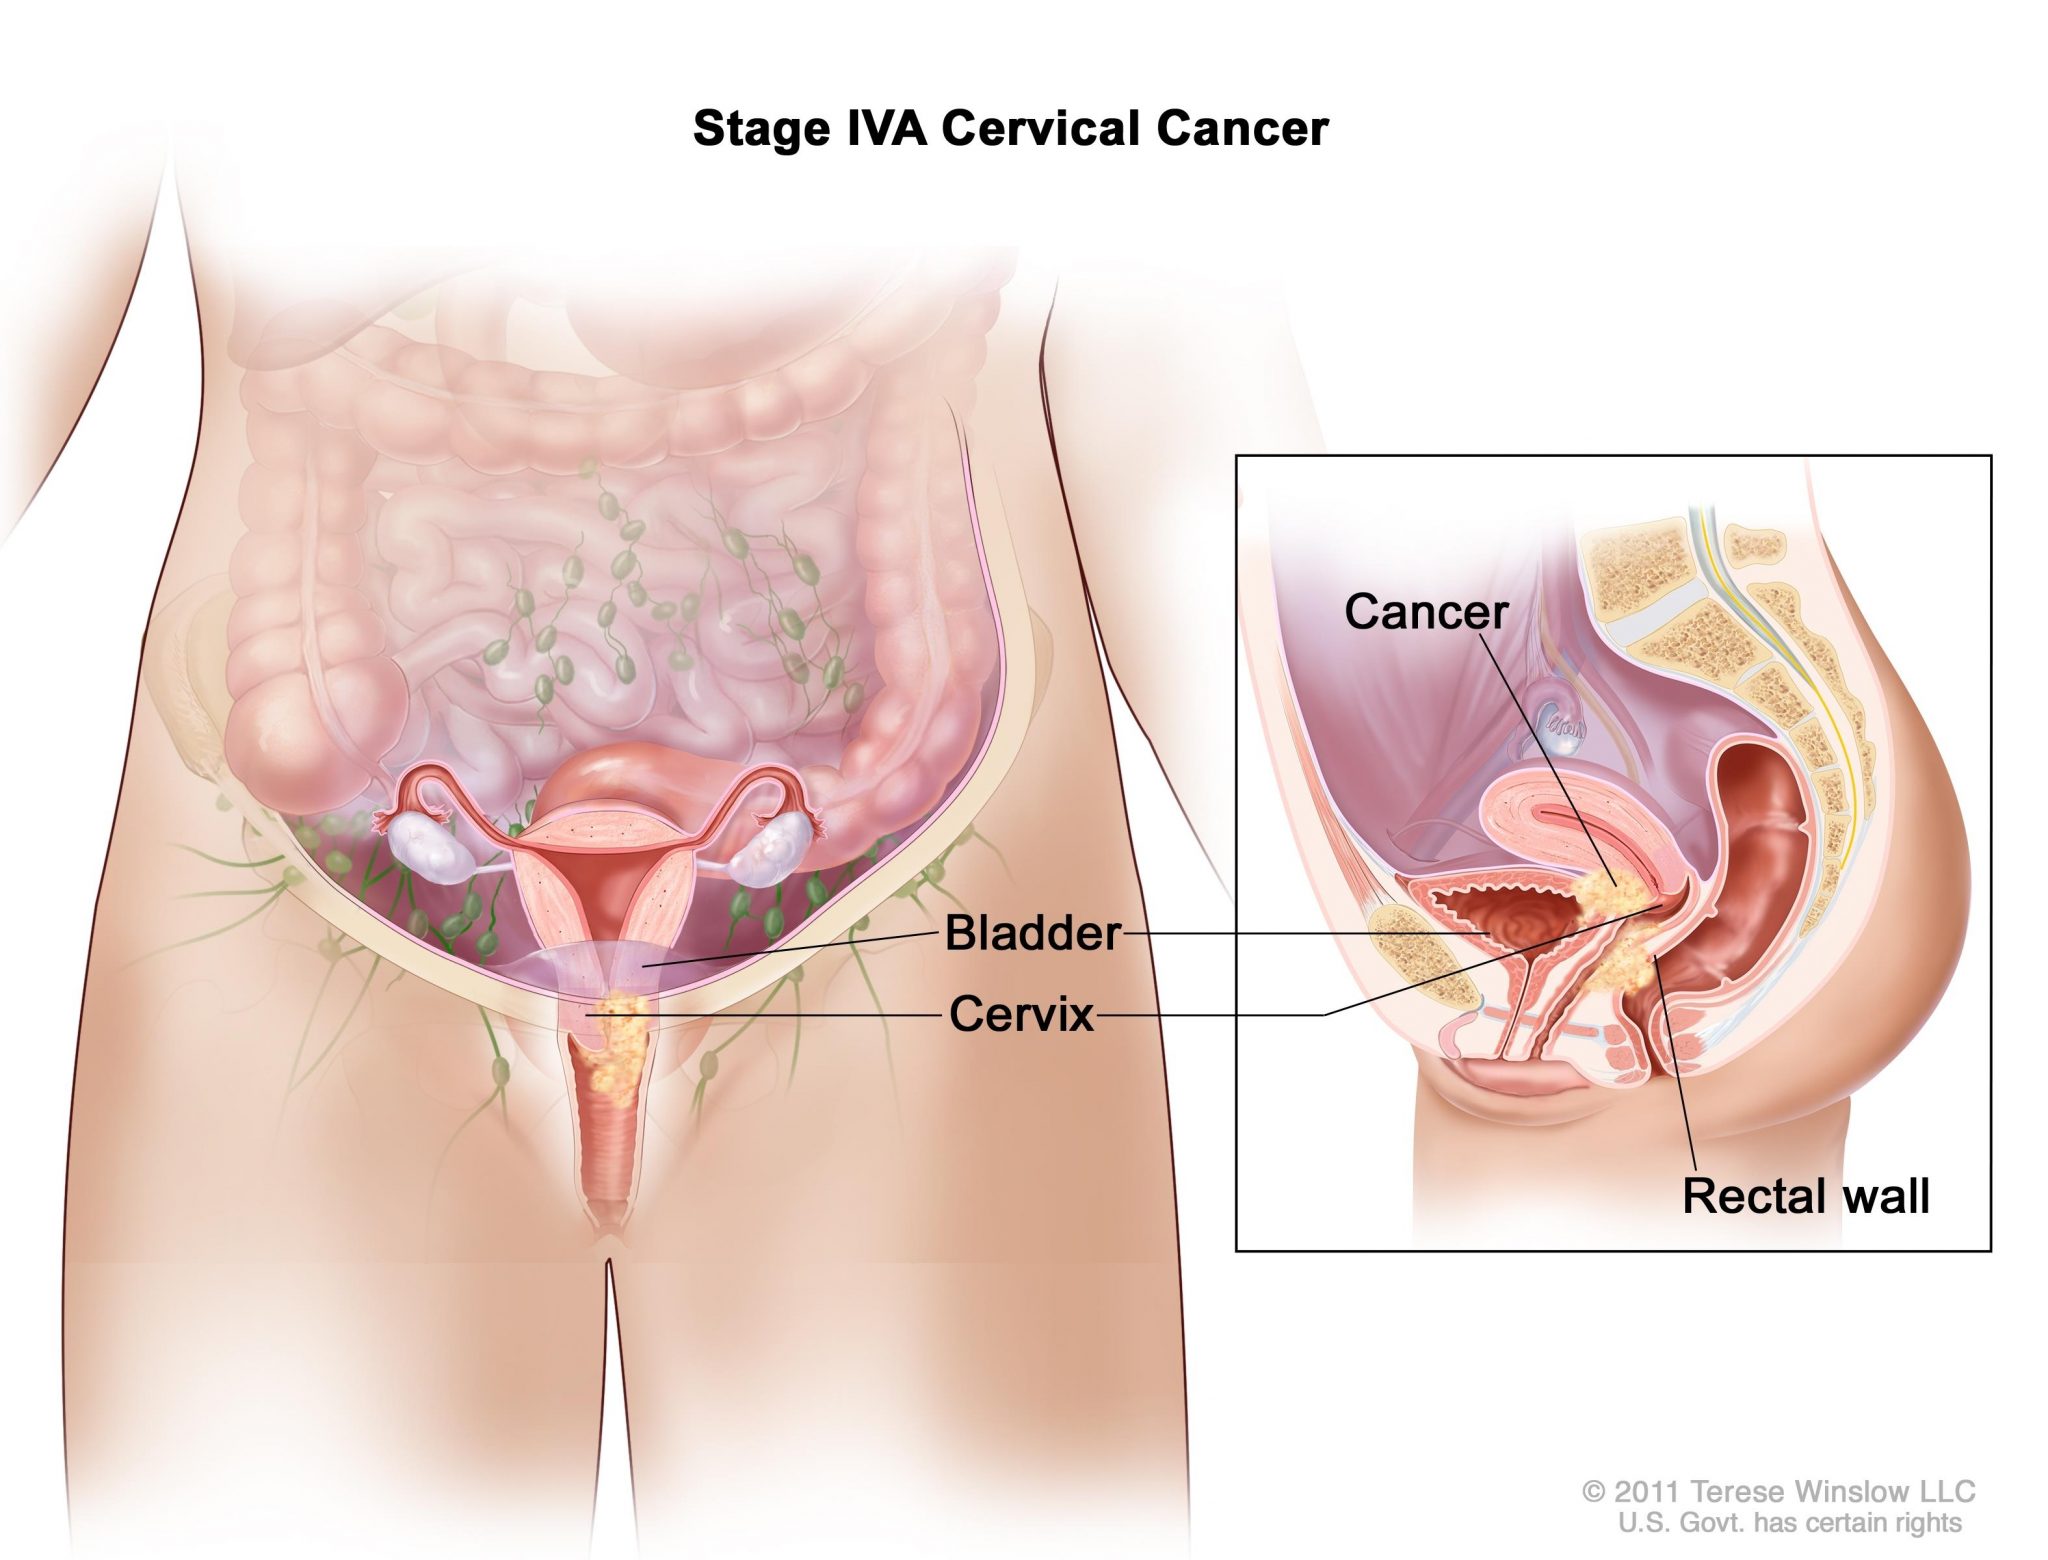 Avoid multiple sexual partners to prevent cervical cancer